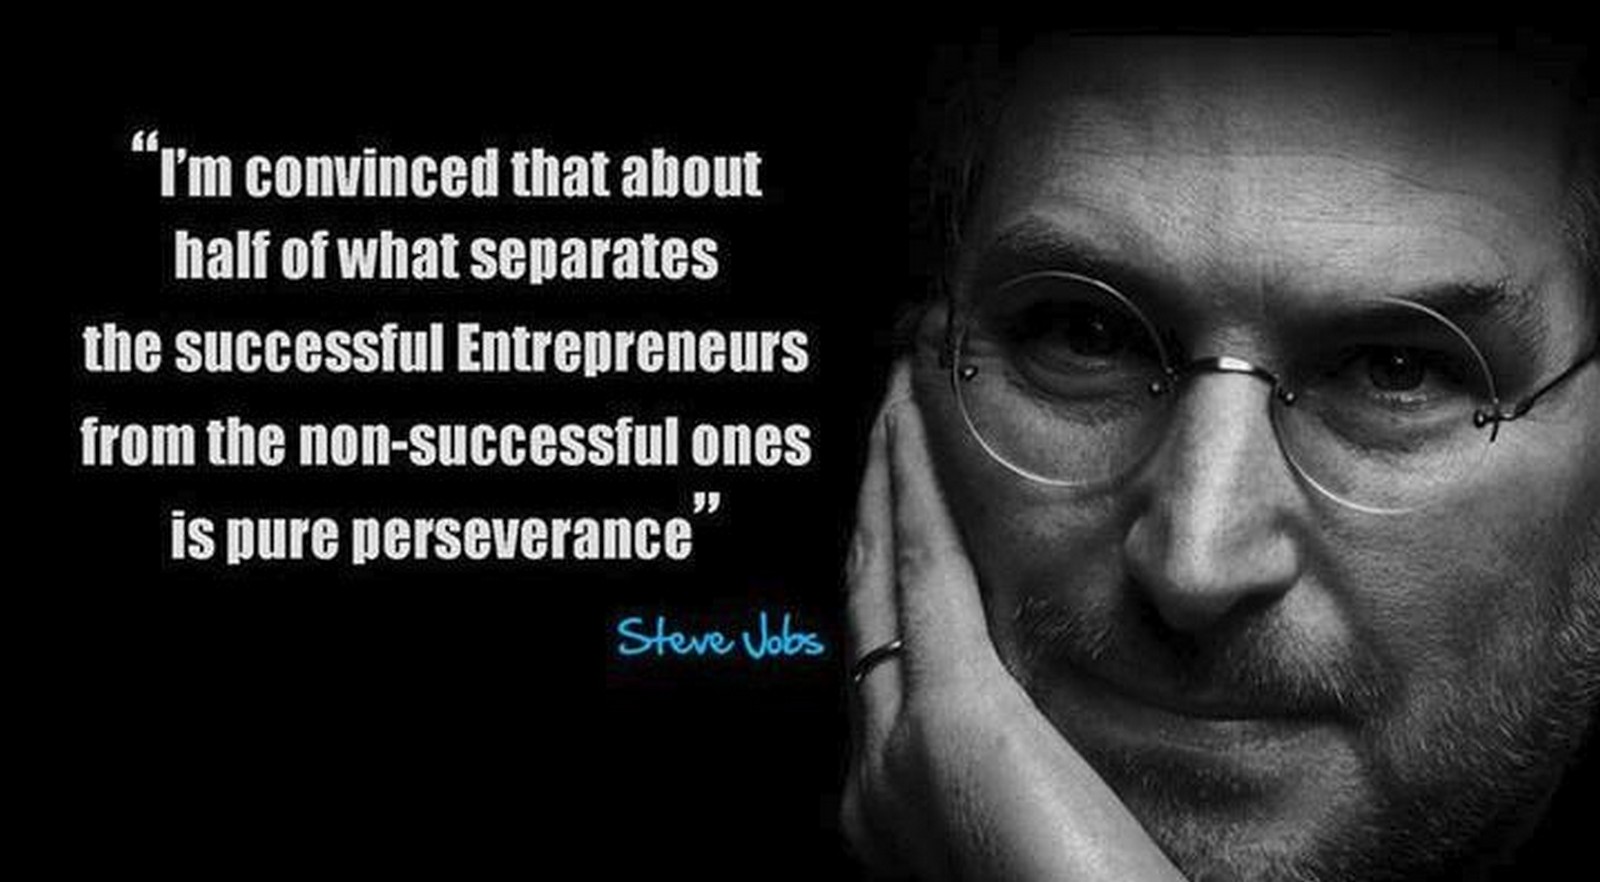 19 Best Steve Jobs Quotes - "I'm convinced that about half of what separates the successful entrepreneurs from the non-successful ones is pure perseverance."